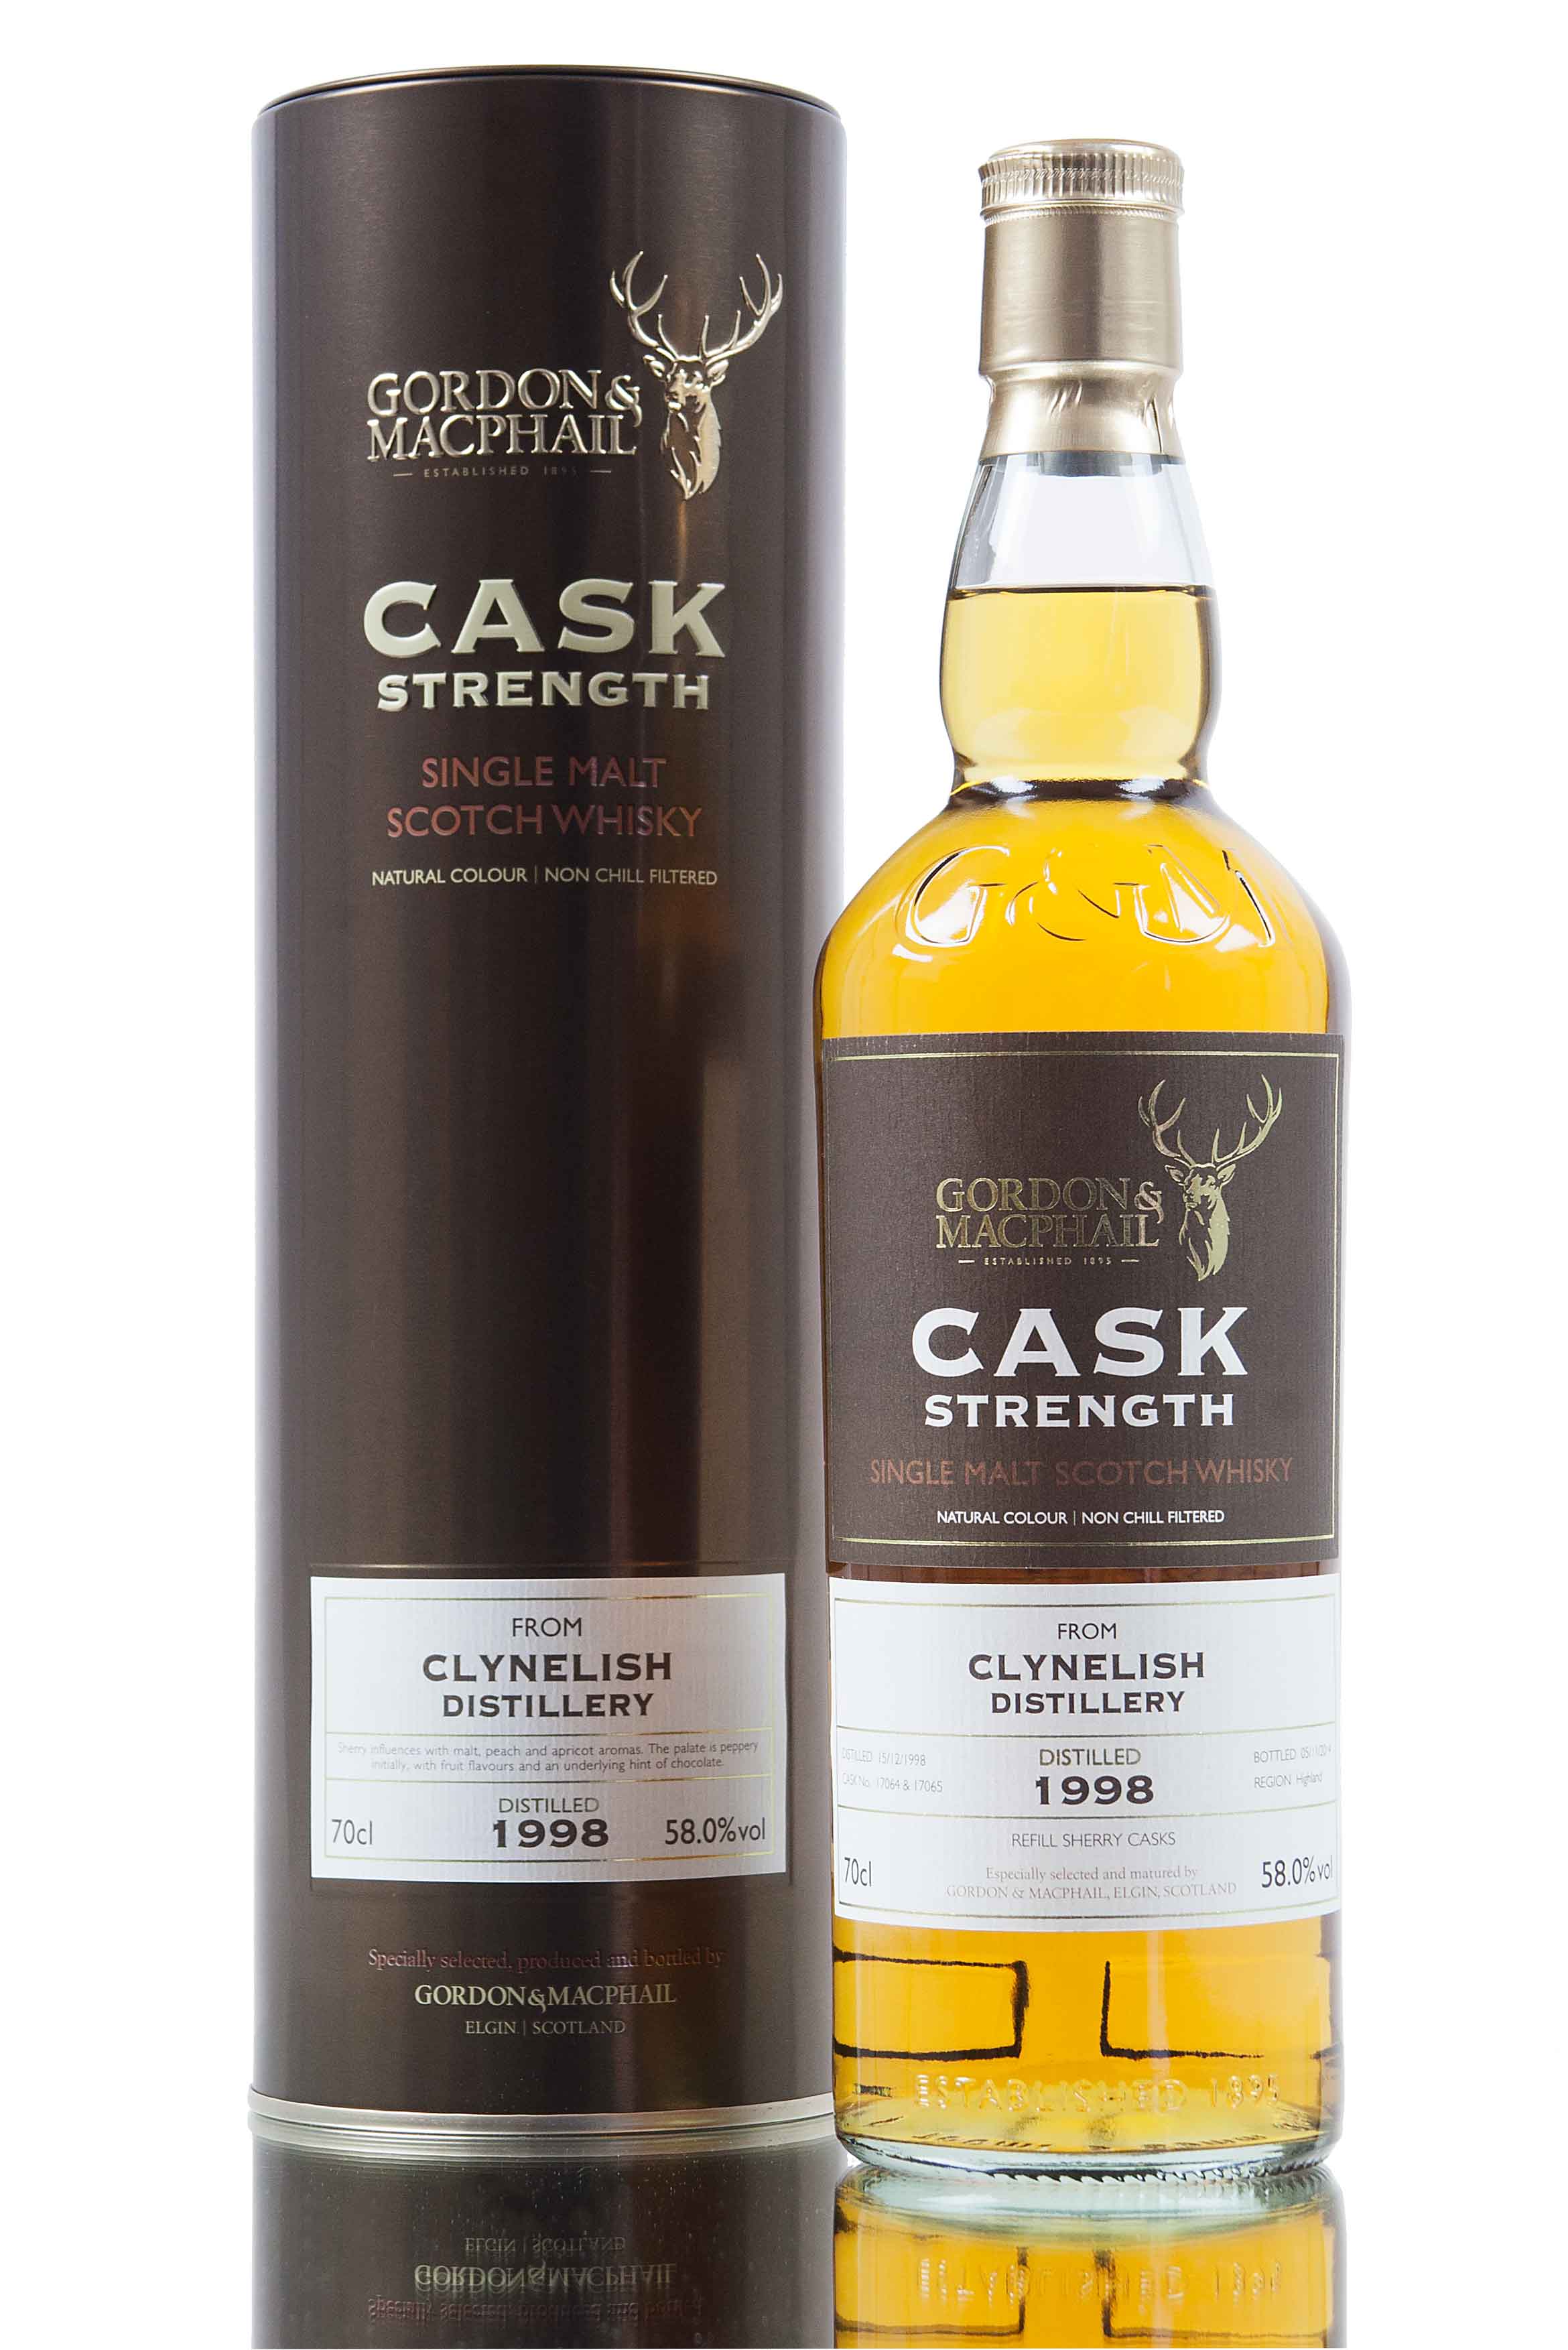 Clynelish 15 Year Old - 1998 / Cask Strength (G&M)